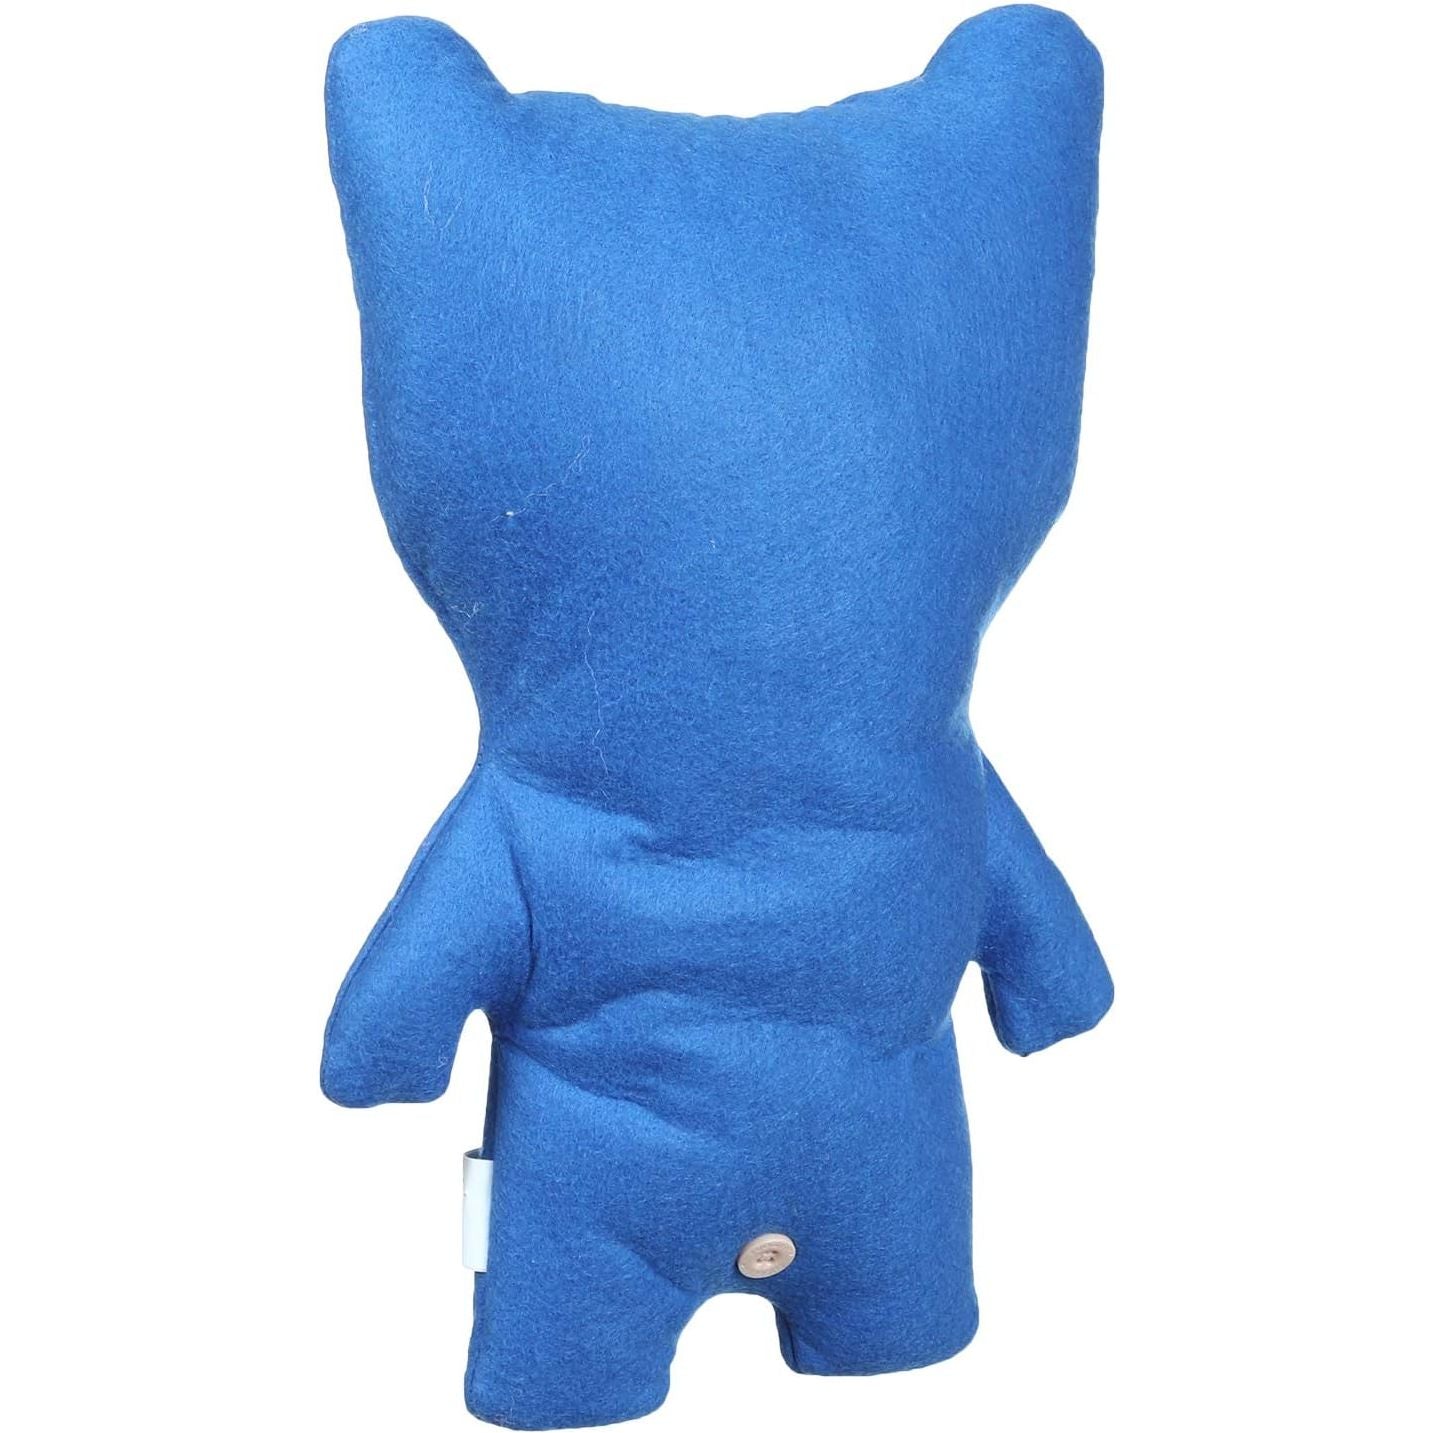 Fugglers Funny Ugly Monster Plush Toy for Boys - Blue